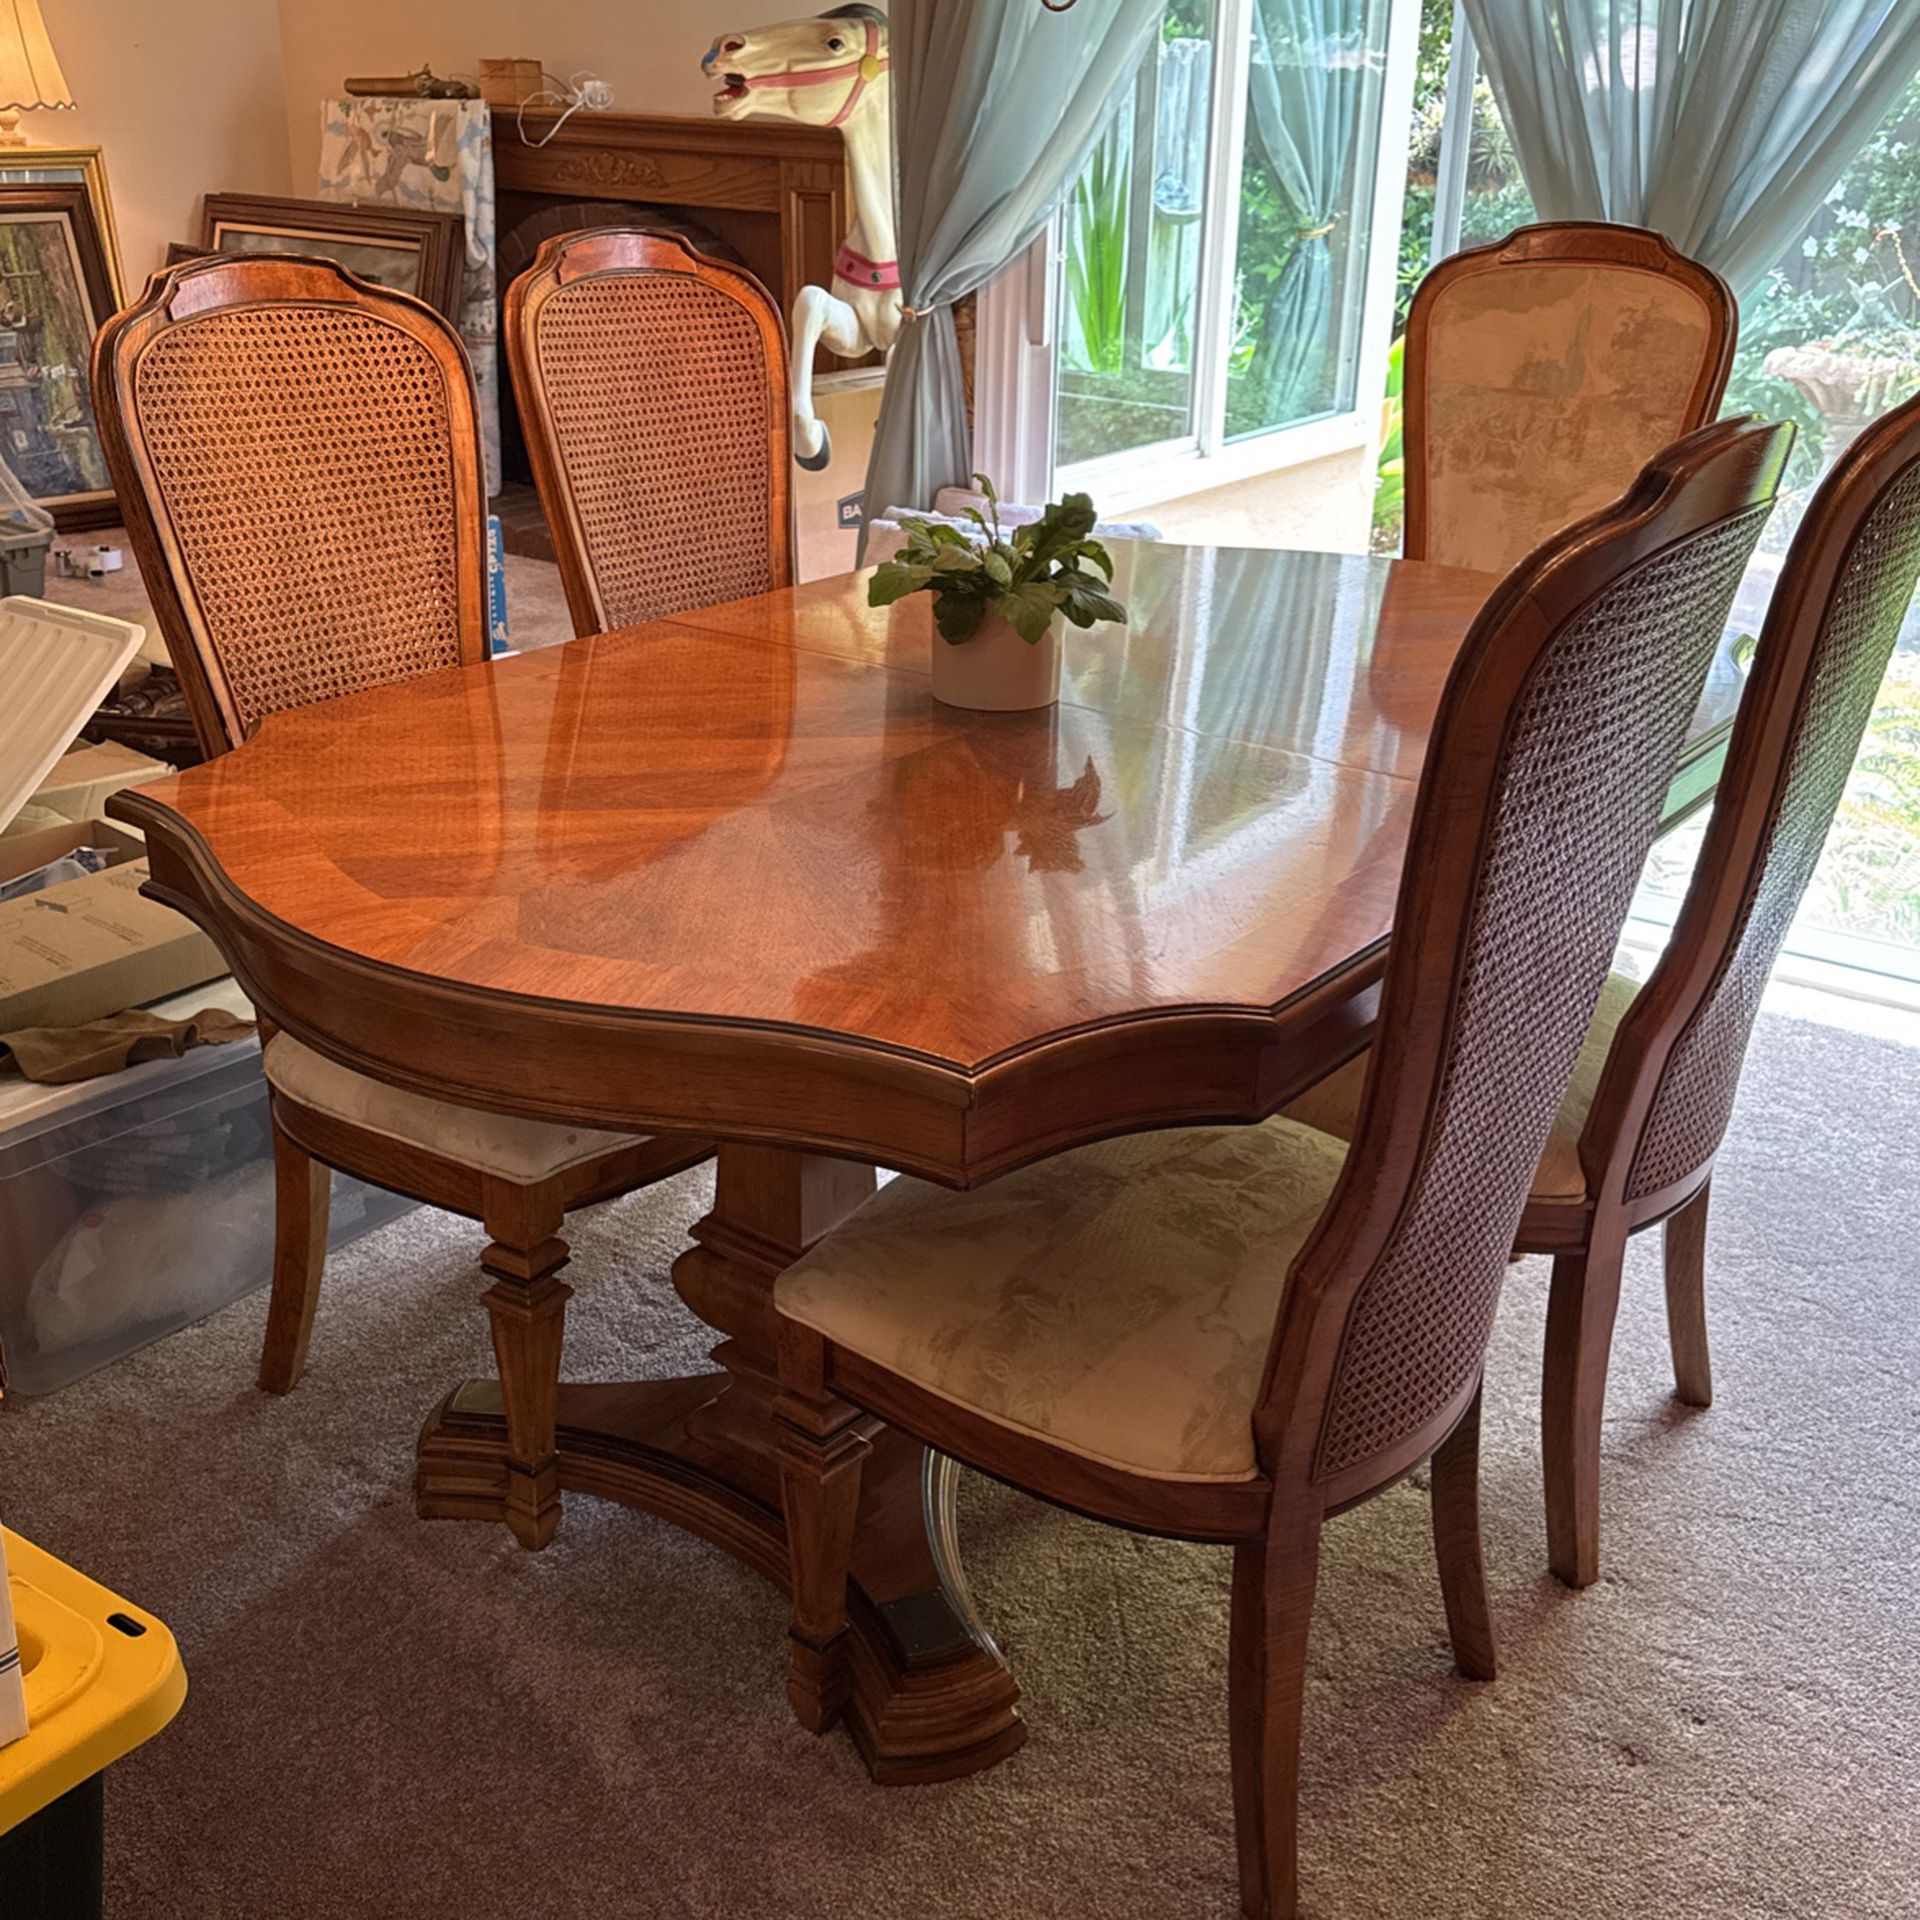 Dining Table With Two Leaves, 6 Chairs, Matching Hutch